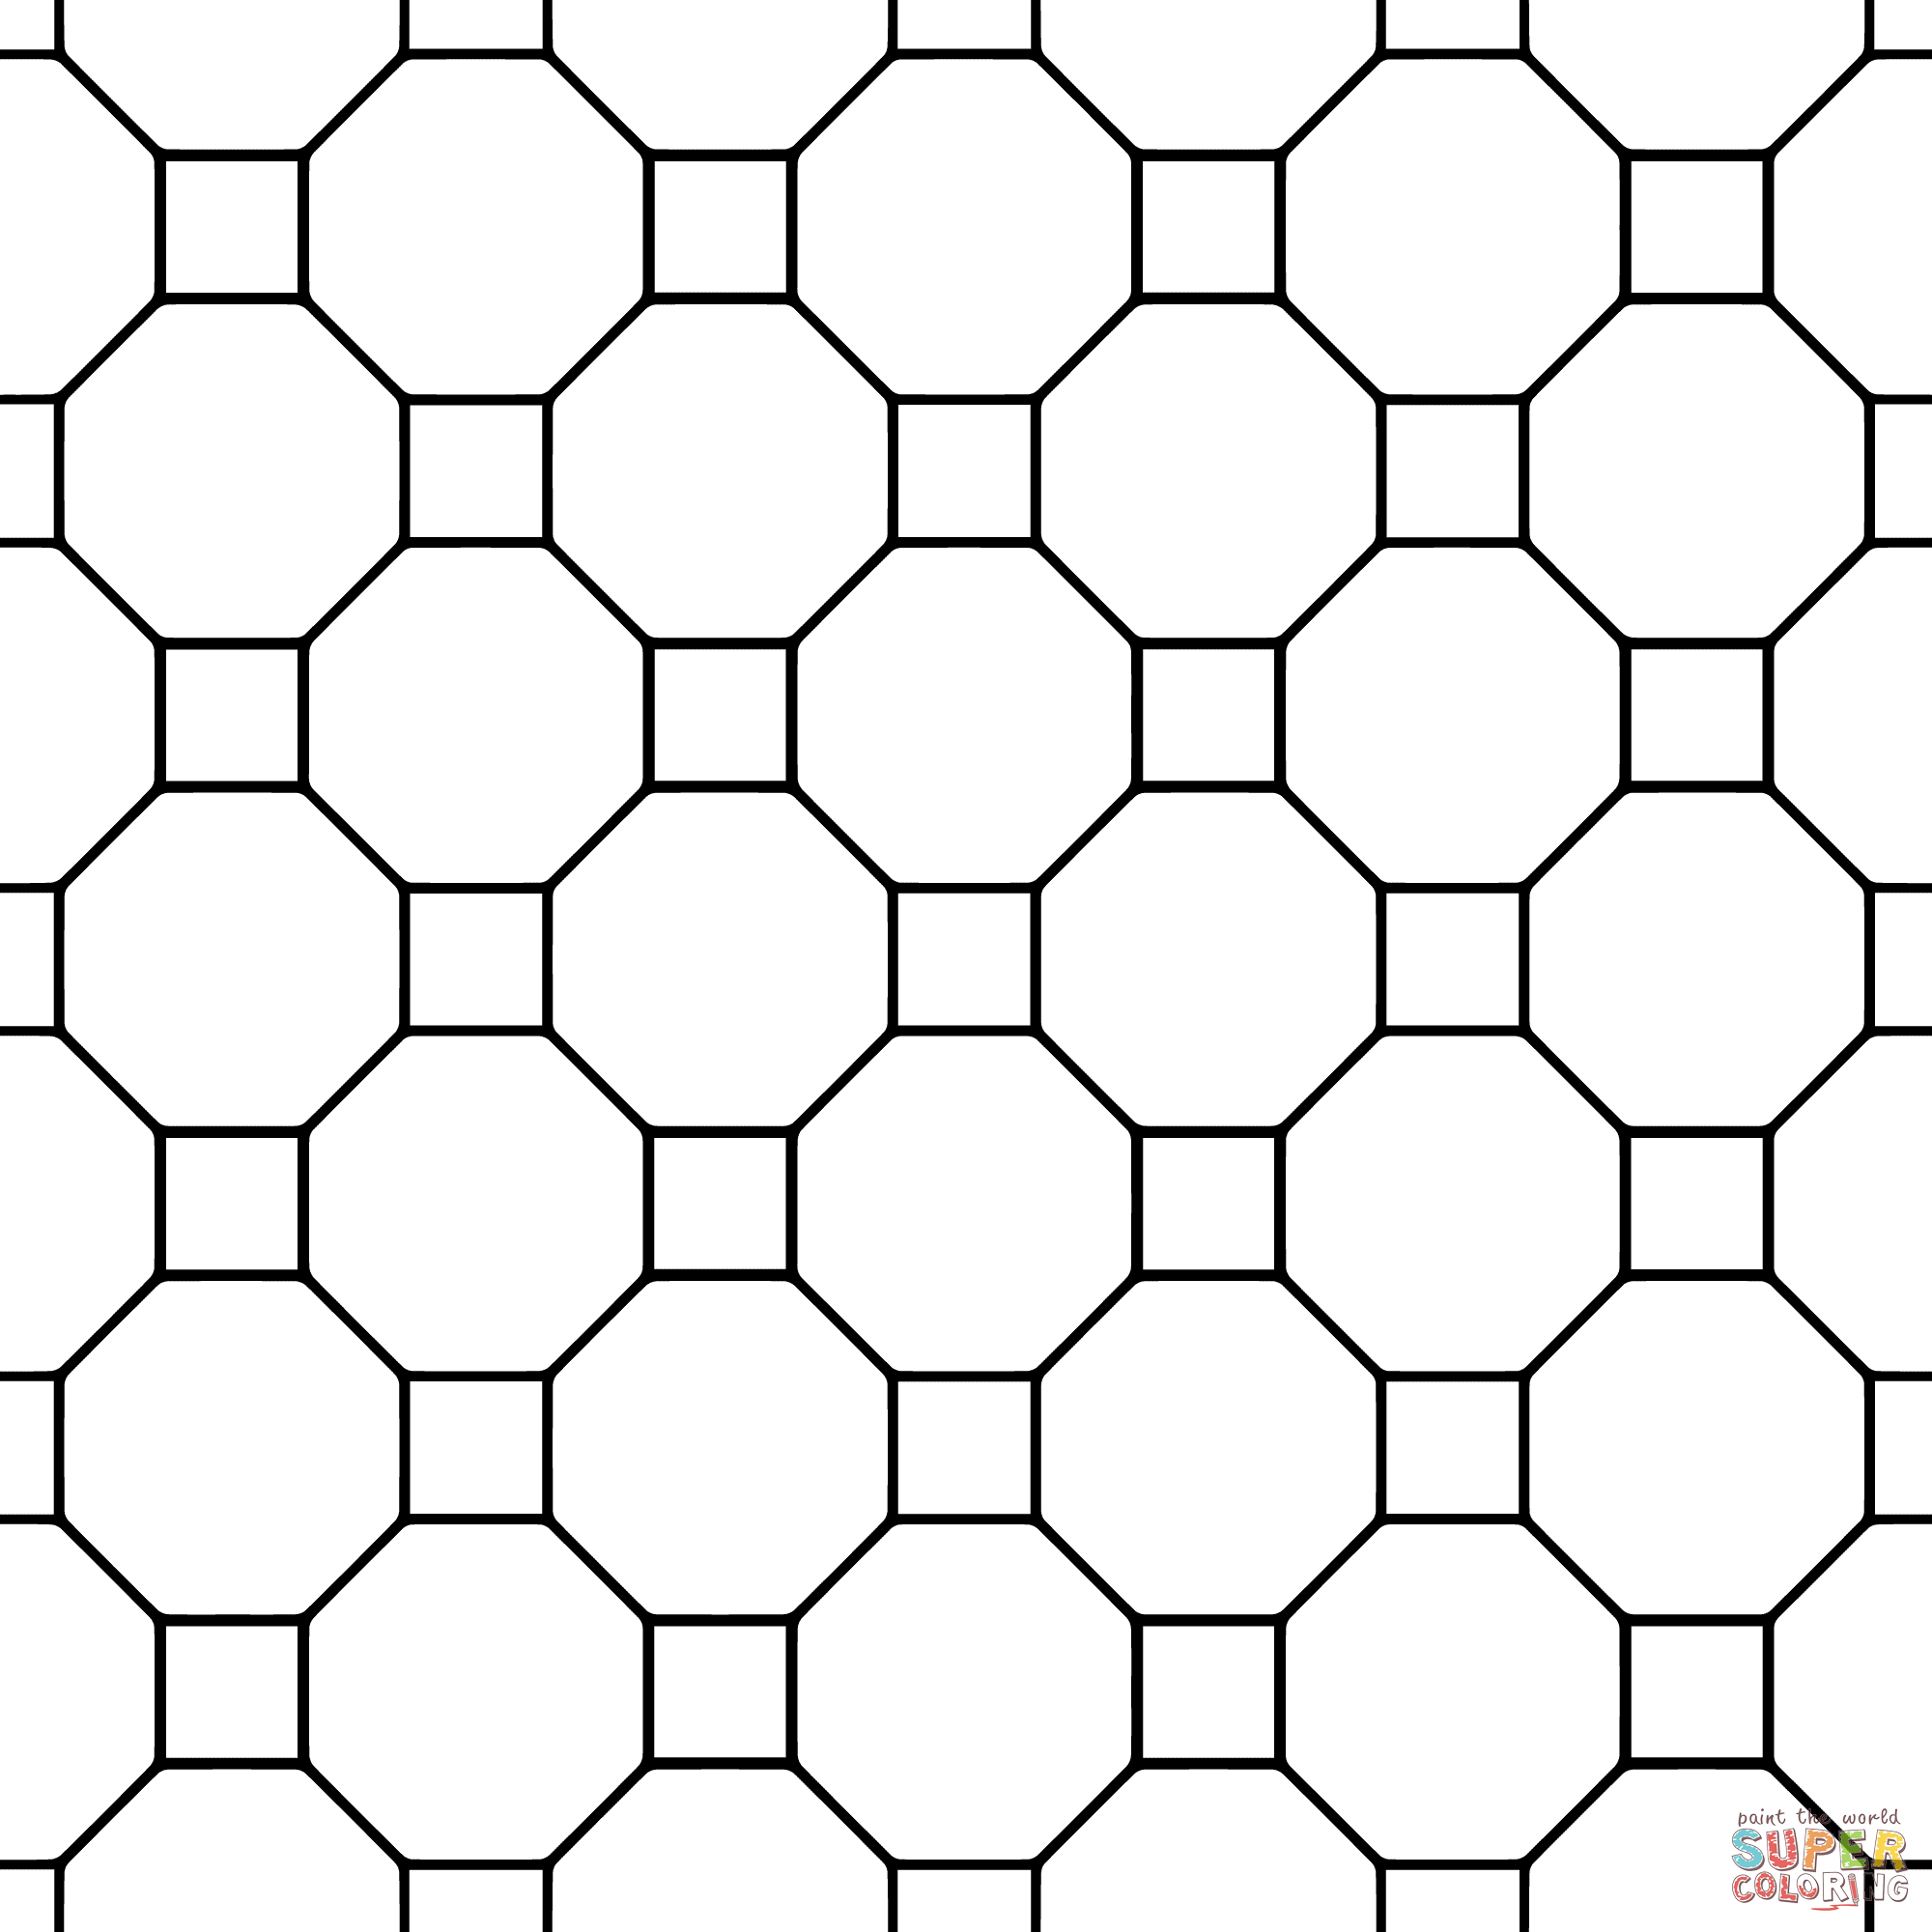 Free Tessellation Patterns Coloring Pages Download Free Tessellation Patterns Coloring Pages Png Images Free Cliparts On Clipart Library